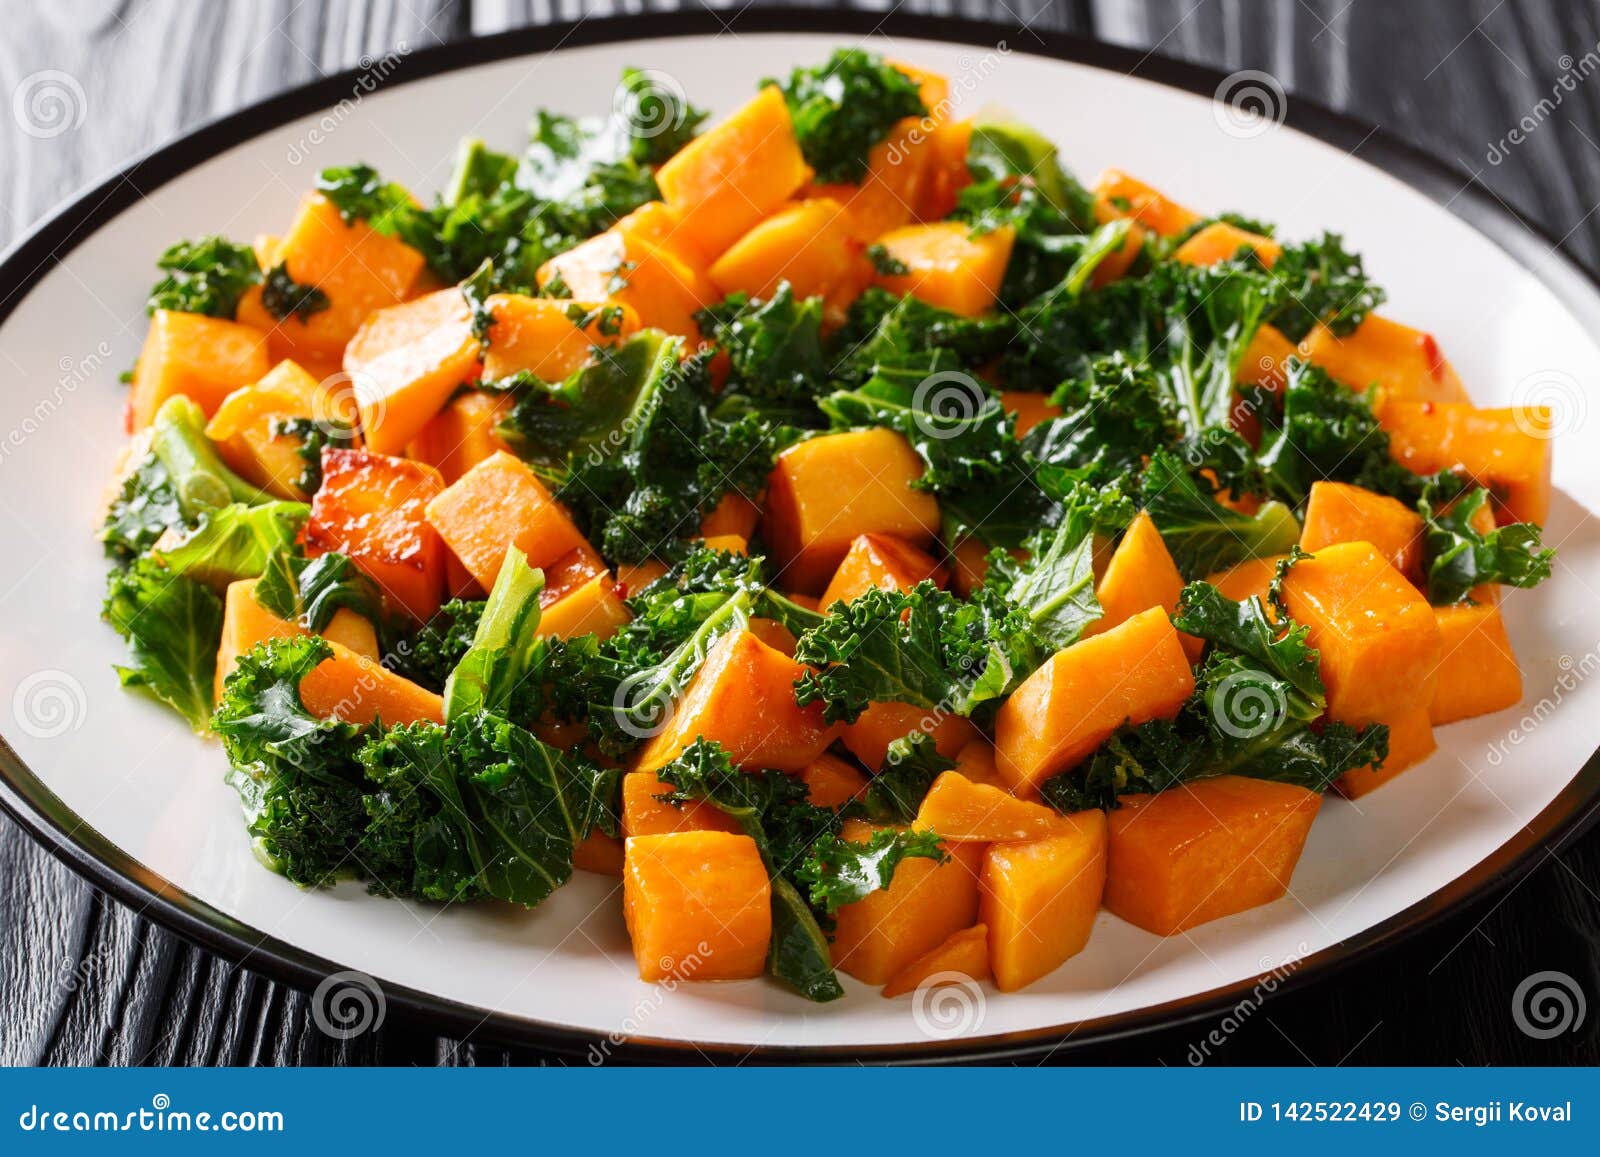 Healthy Eating Fried Sweet Potatoes With Cabbage Kale ...